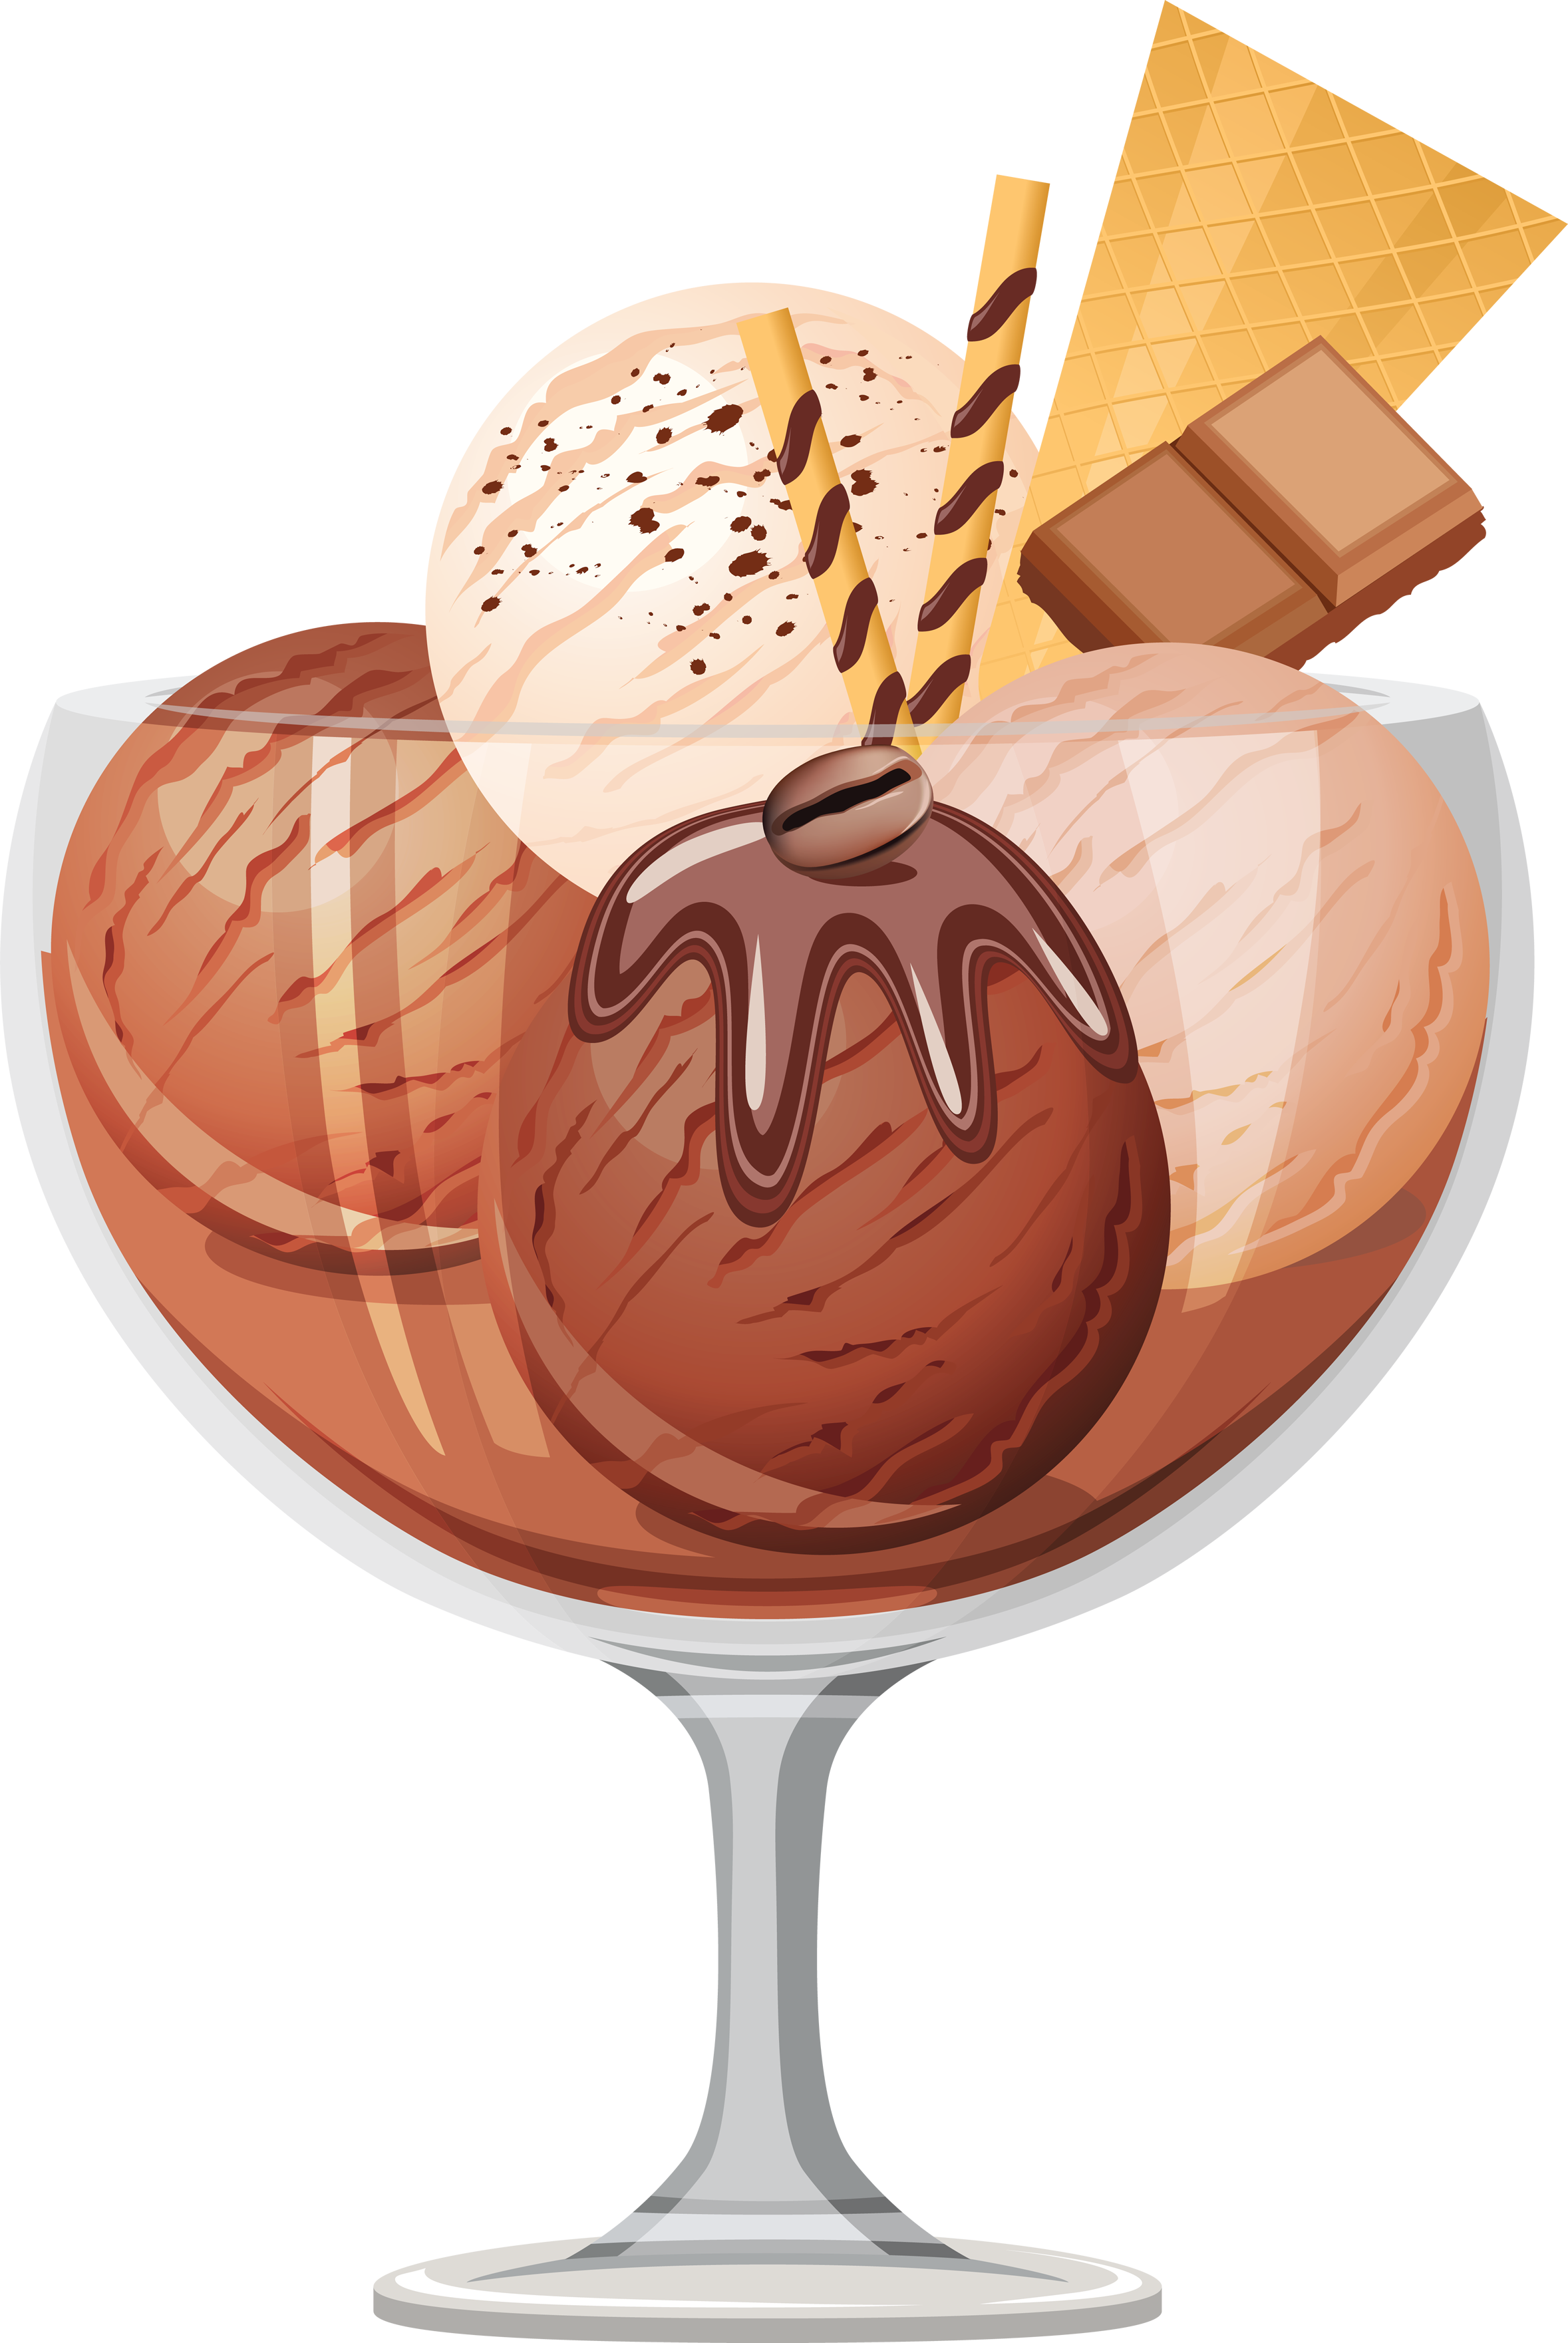 Ice Cream Scoops in Bowl PNG Image